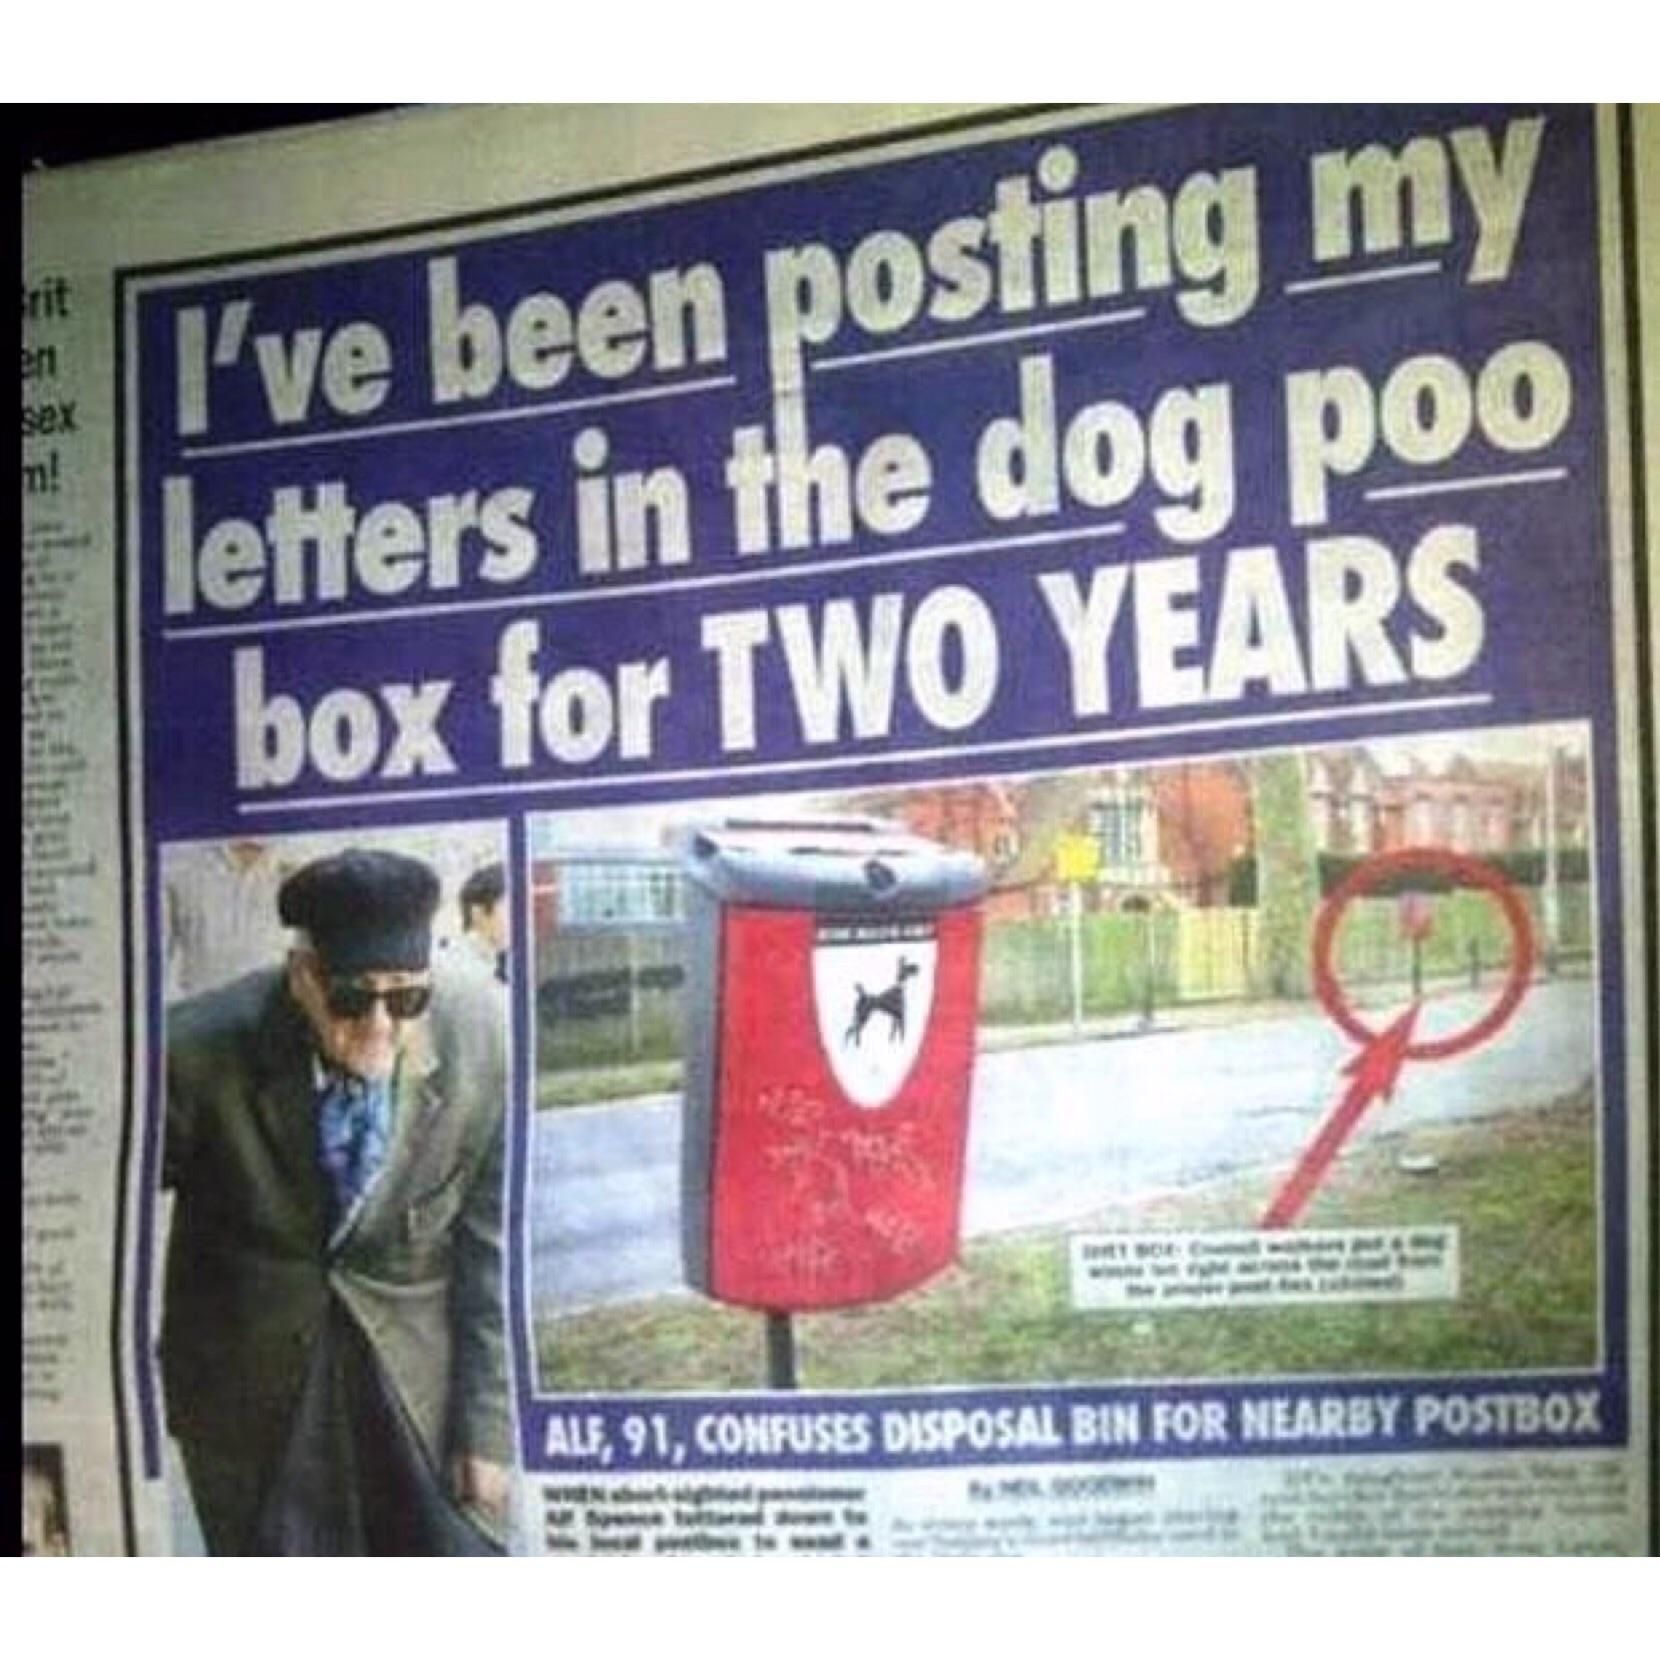 His letters were probably shit anyways